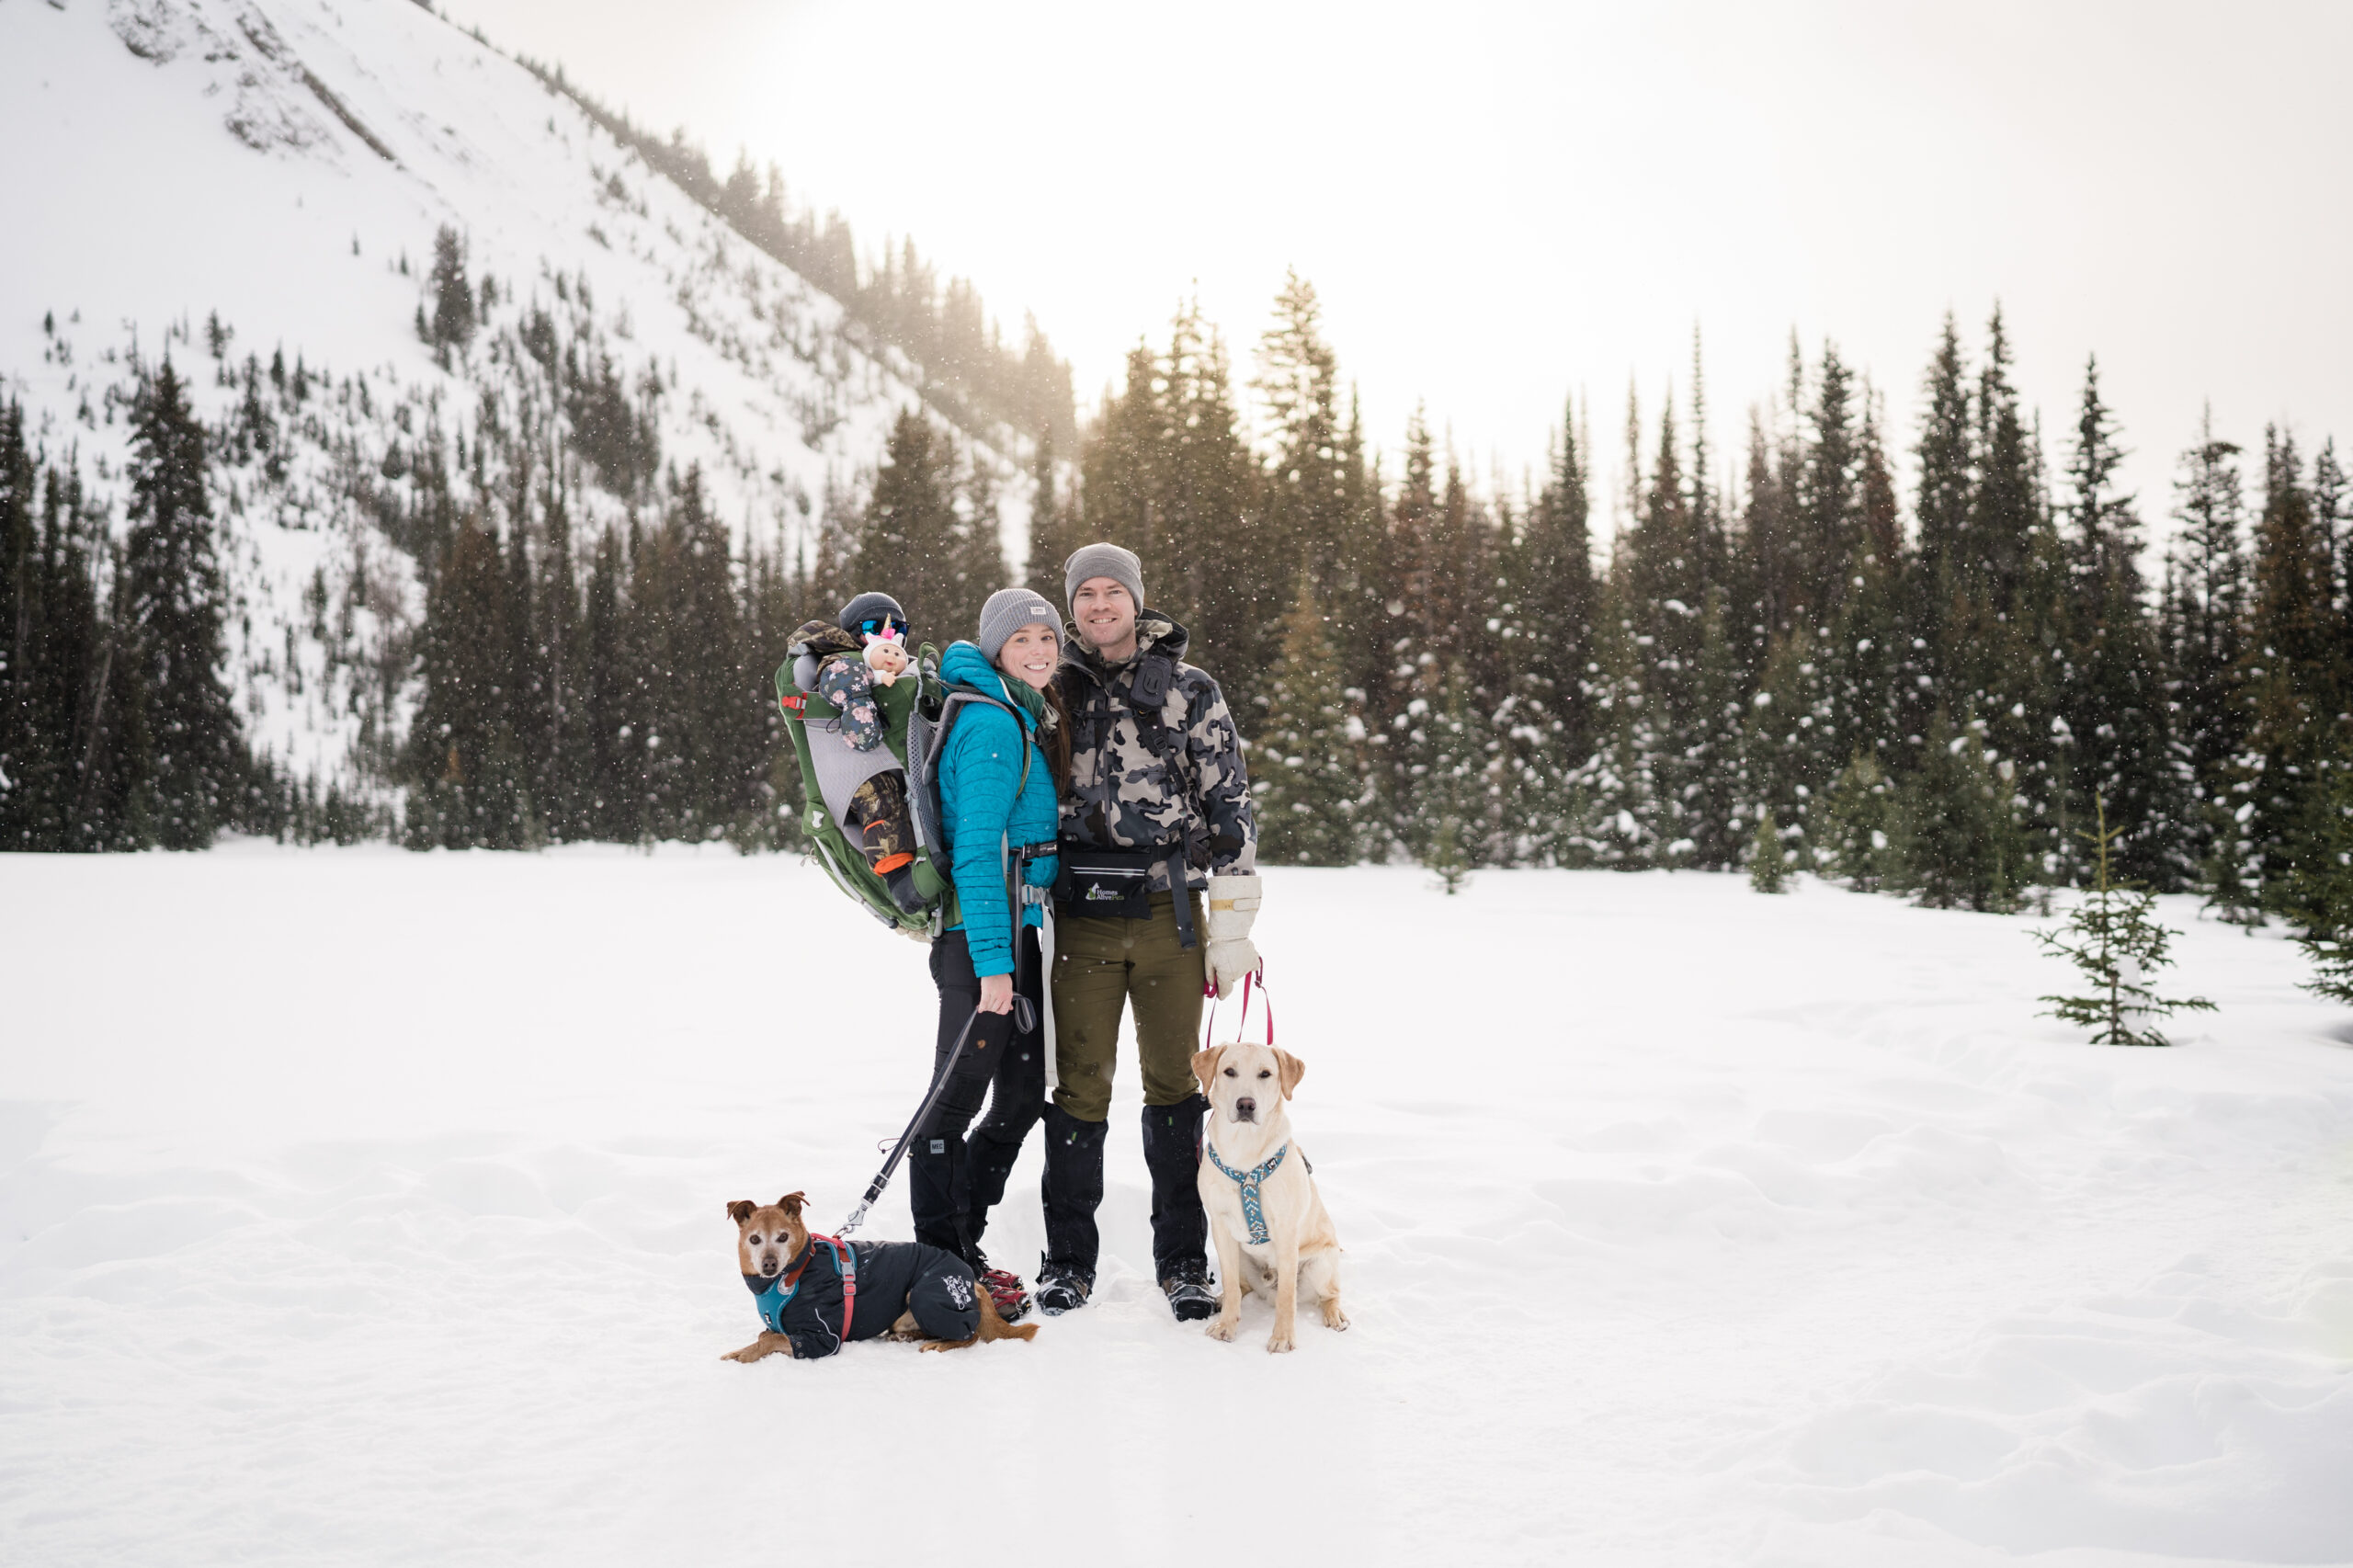 Family of two parents, baby in a backpack carrier, and two dogs smiles at the camera on a hike in the snowy mountains with snow coming down and the sun setting behind them